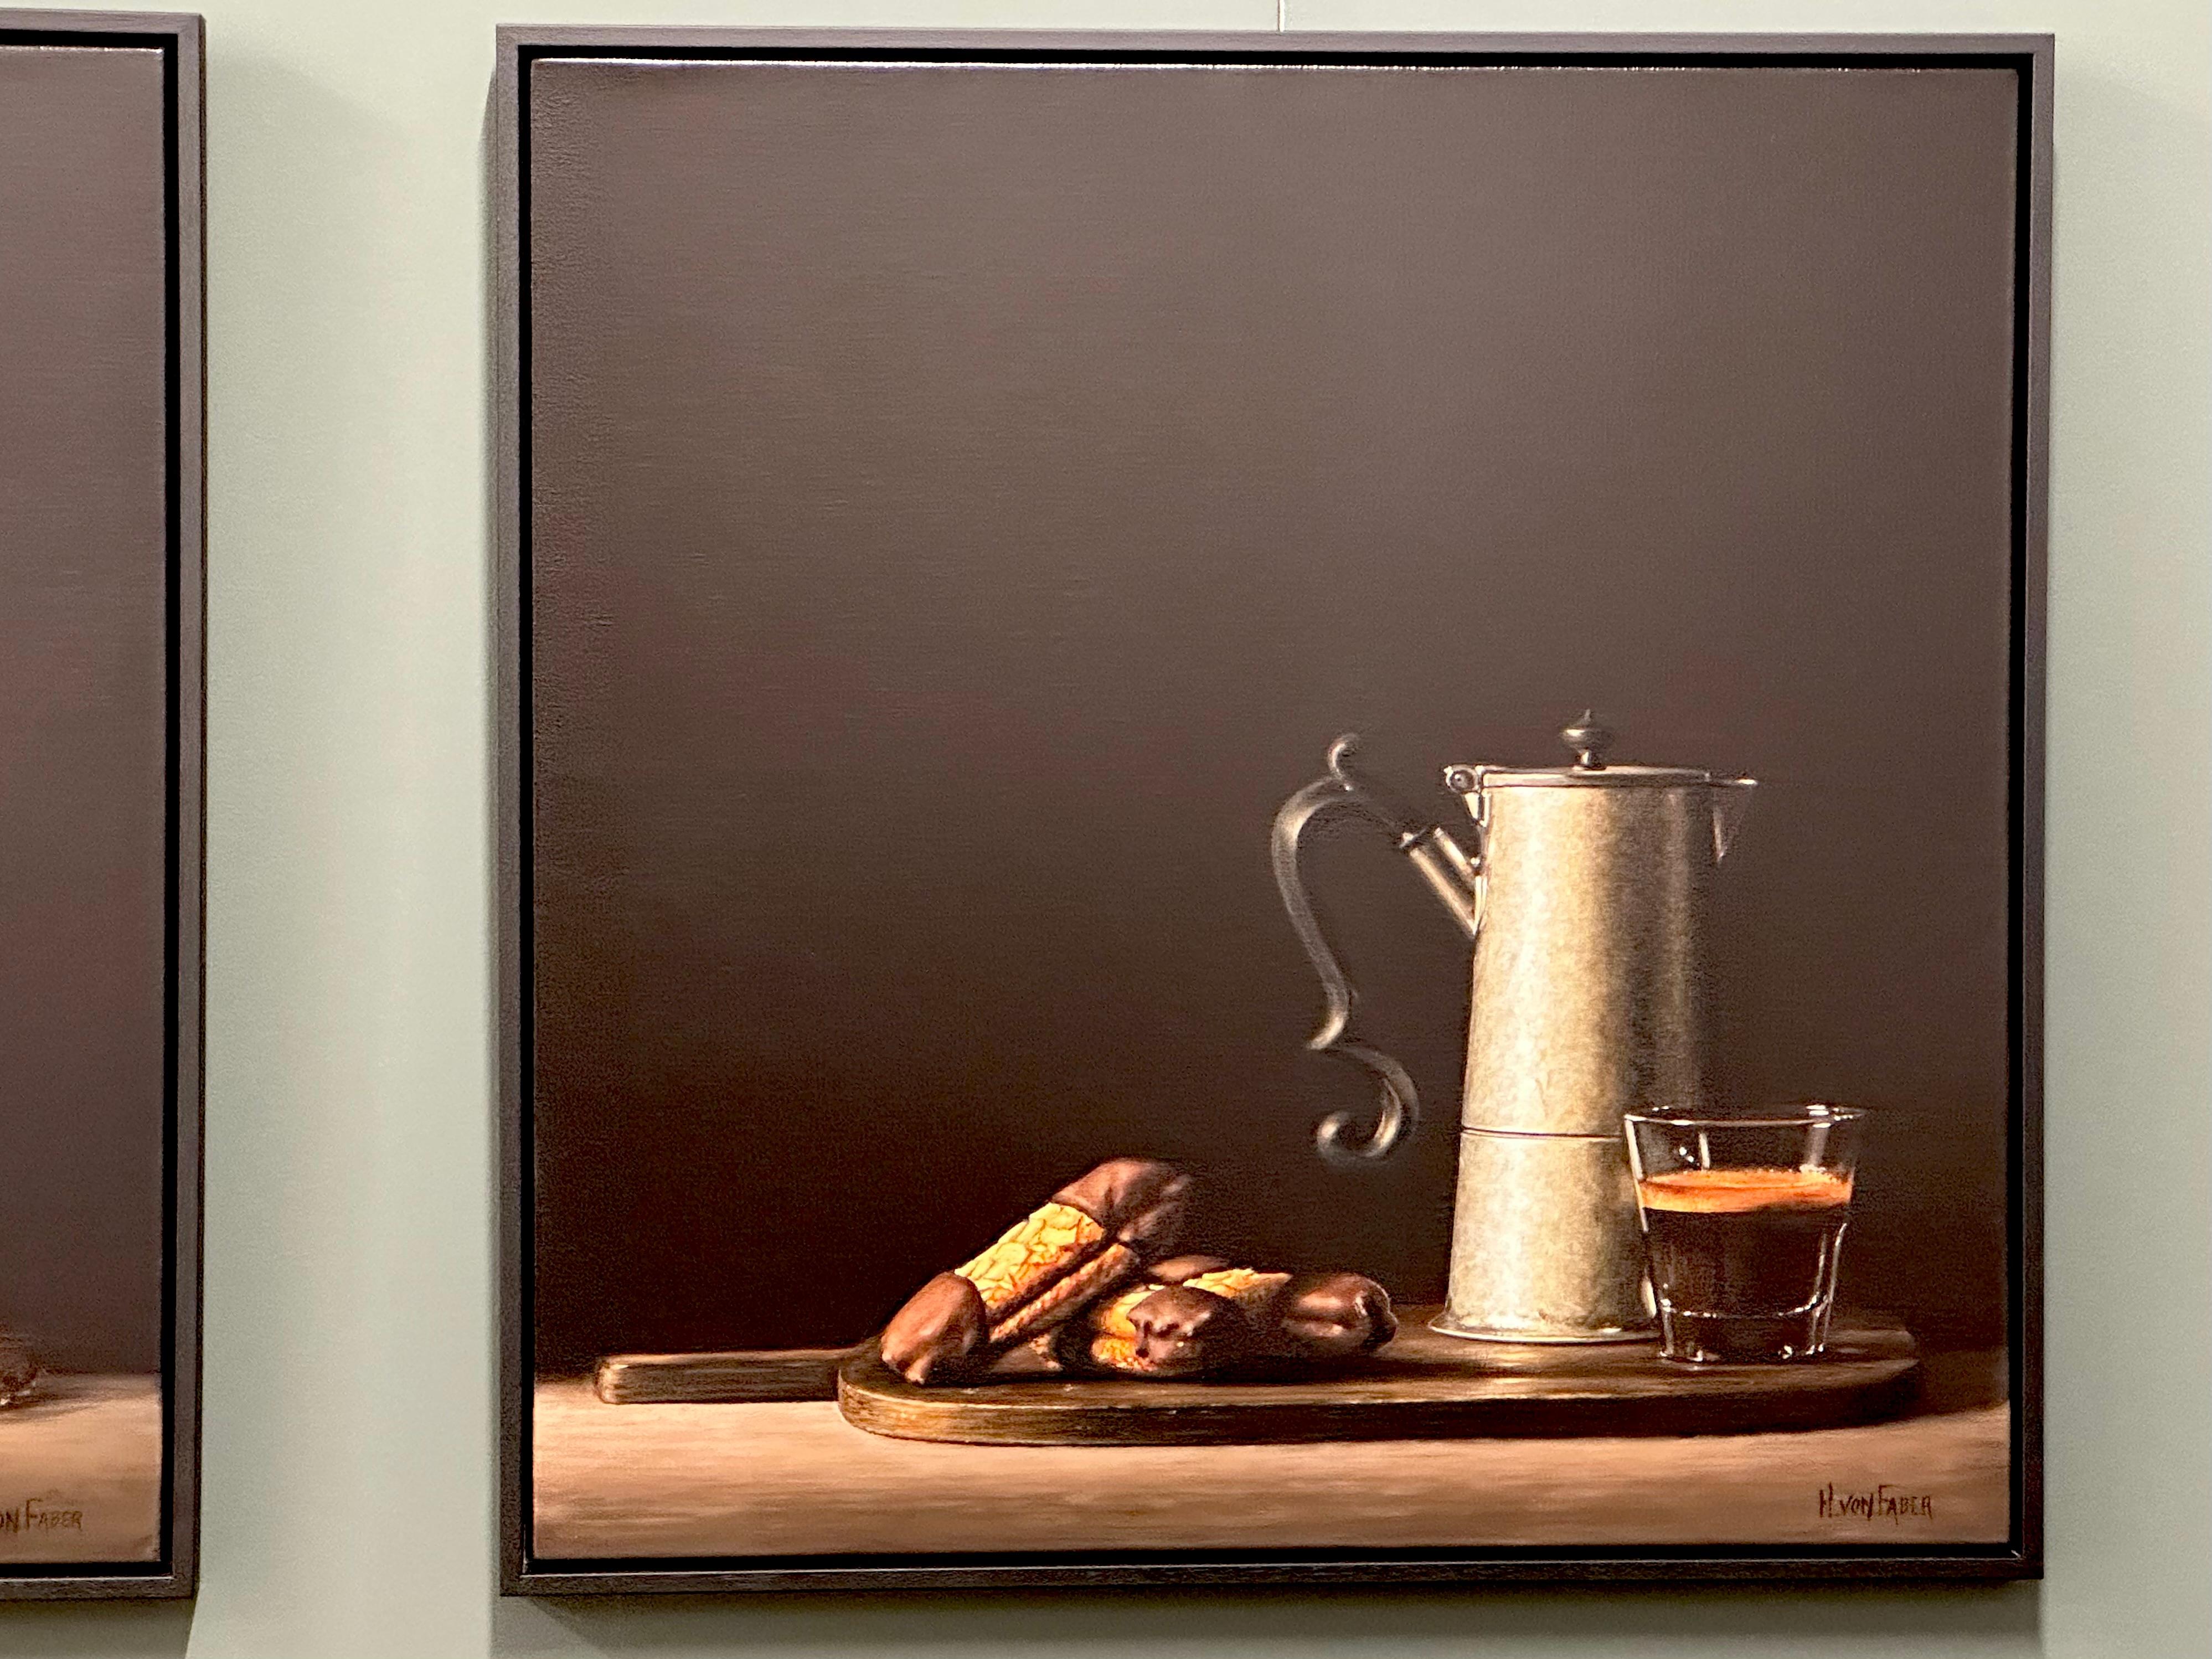 Chocolate Cookies with Coffee - 21st Contemporary Realistic Still-life painting - Black Figurative Painting by Heidi von Faber